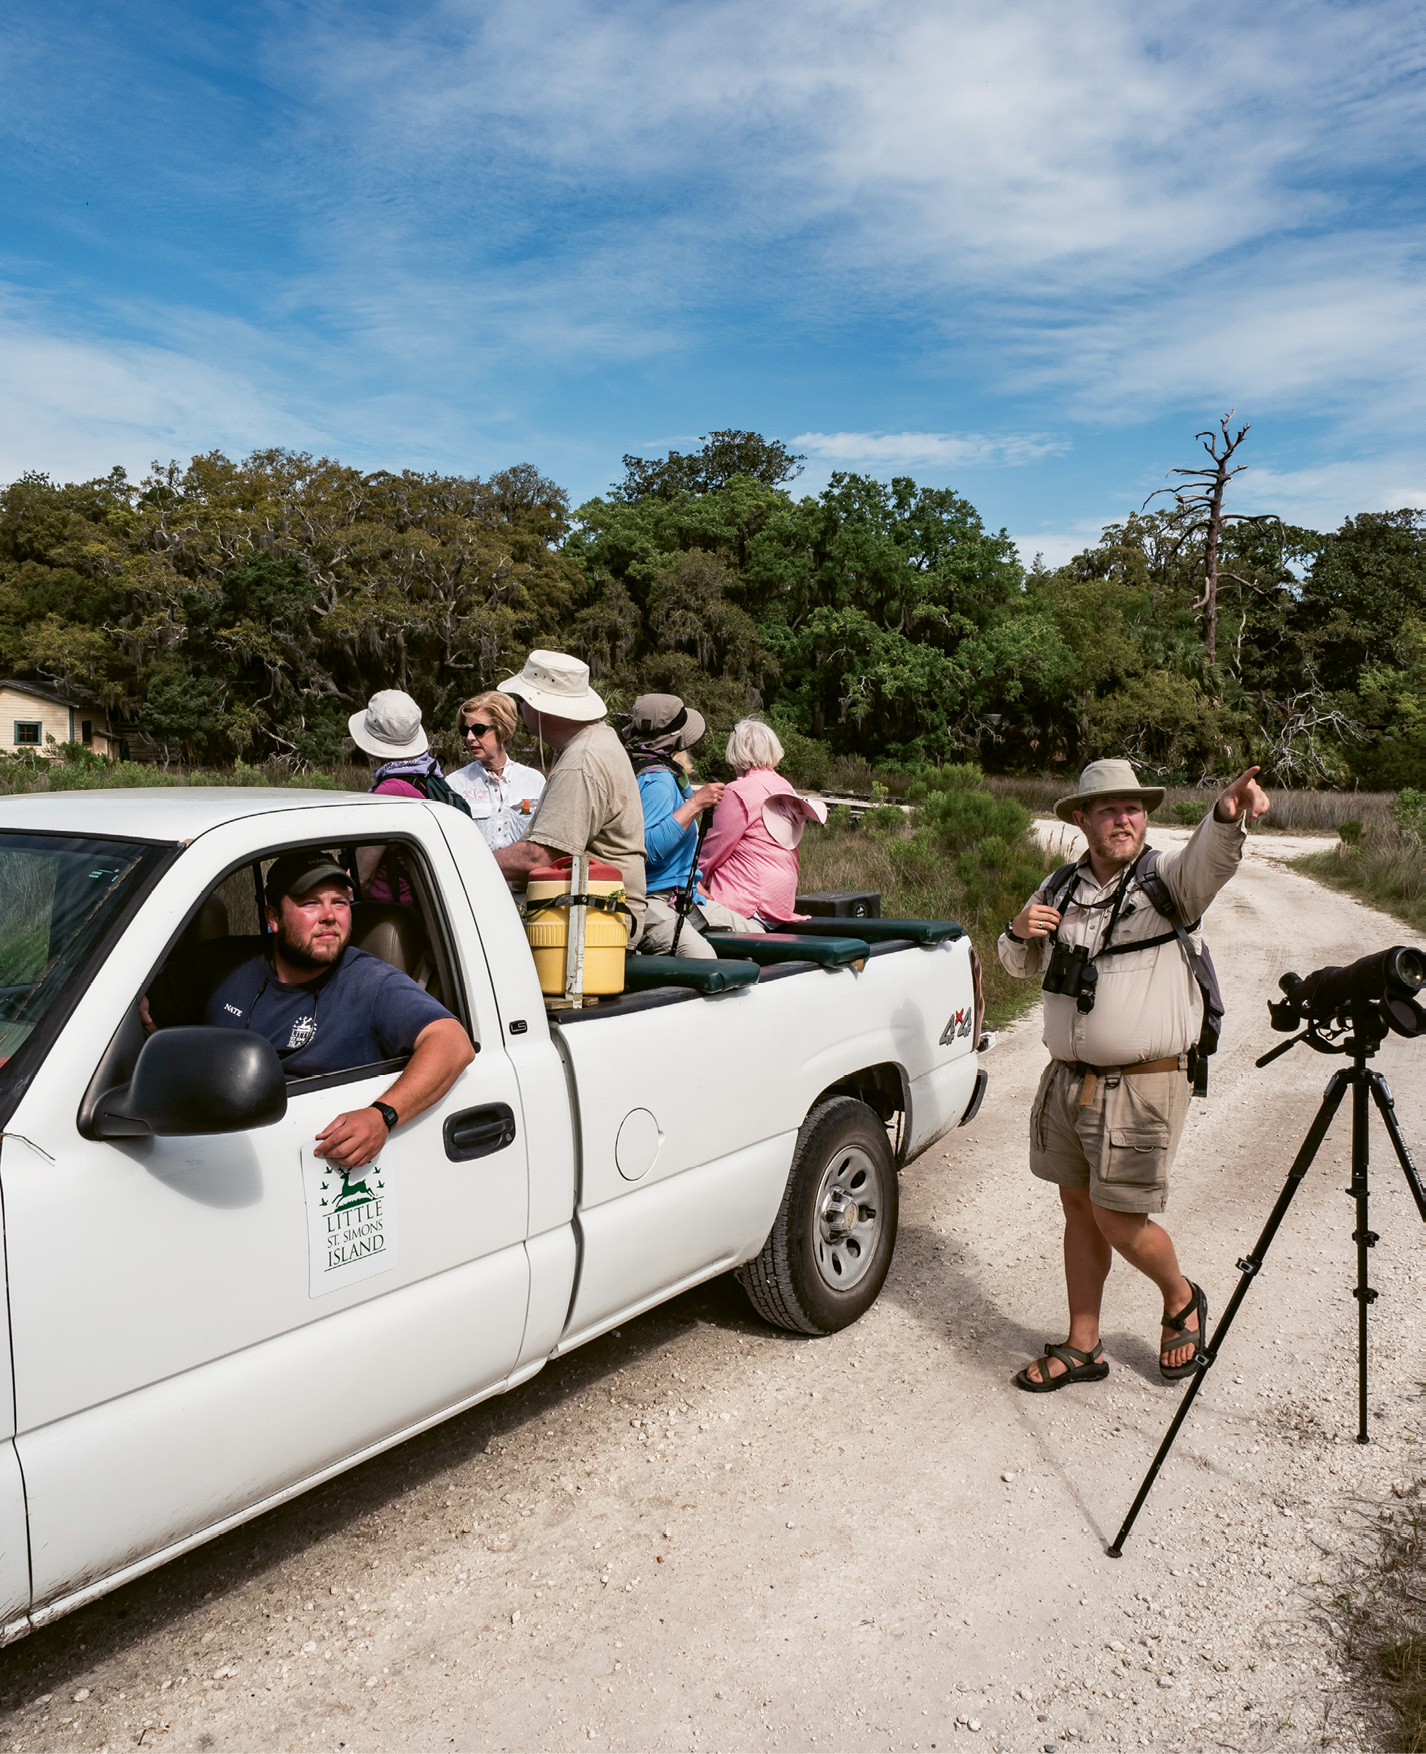 Winged adventures: Naturalist-led tours are offered several times each day on Little St. Simons Island, where more than 280 bird species have been observed.